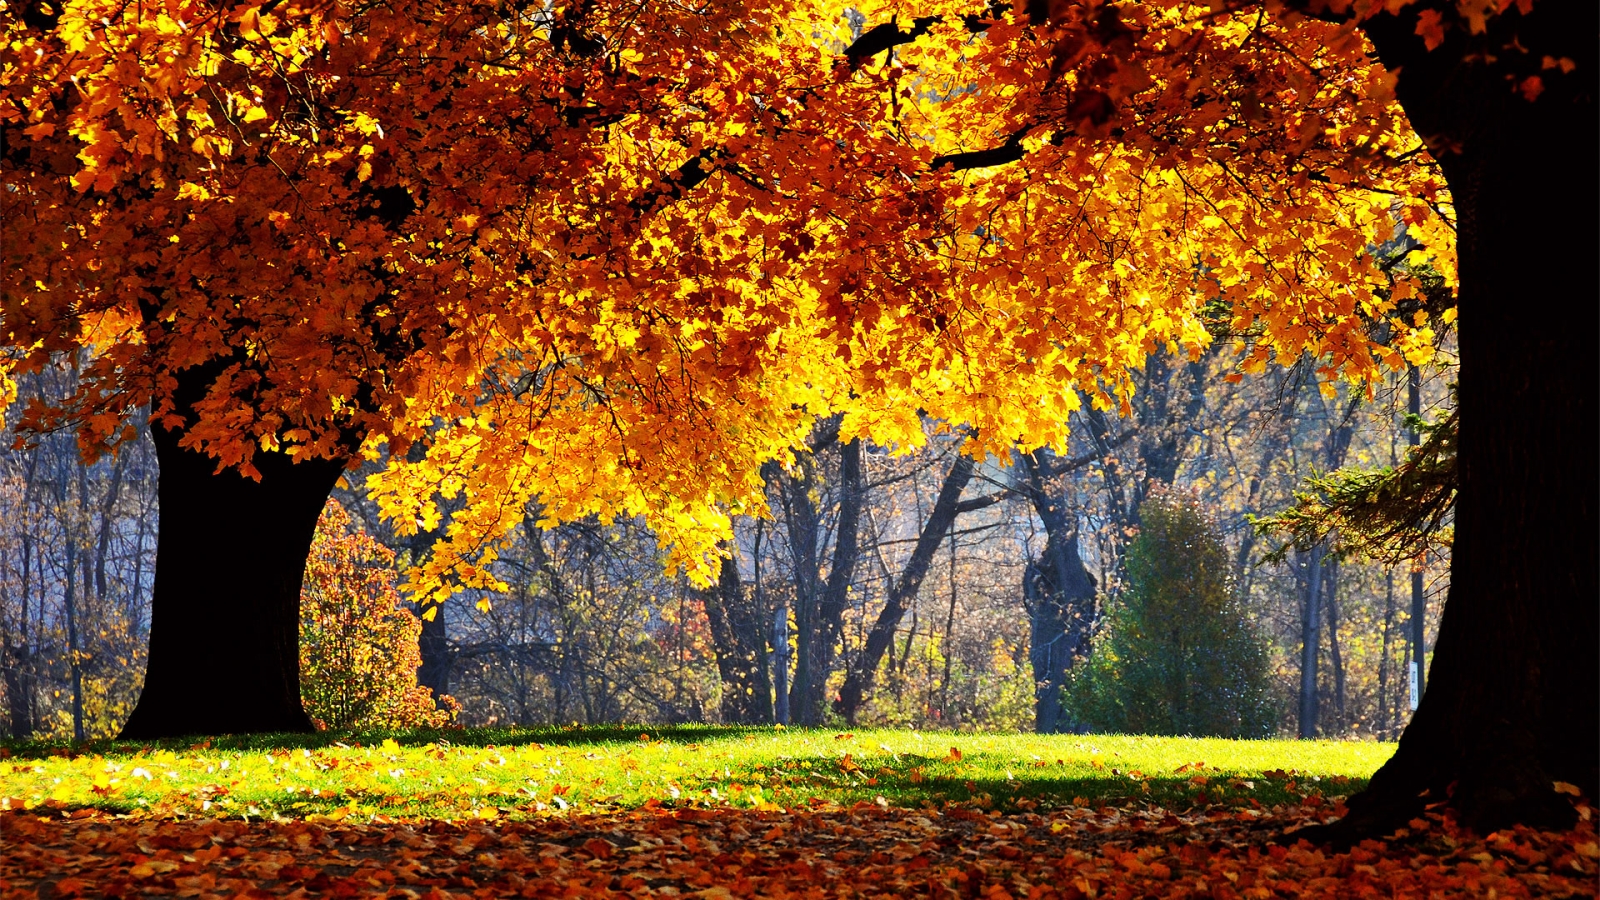 Autumn colors over trees for 1600 x 900 HDTV resolution